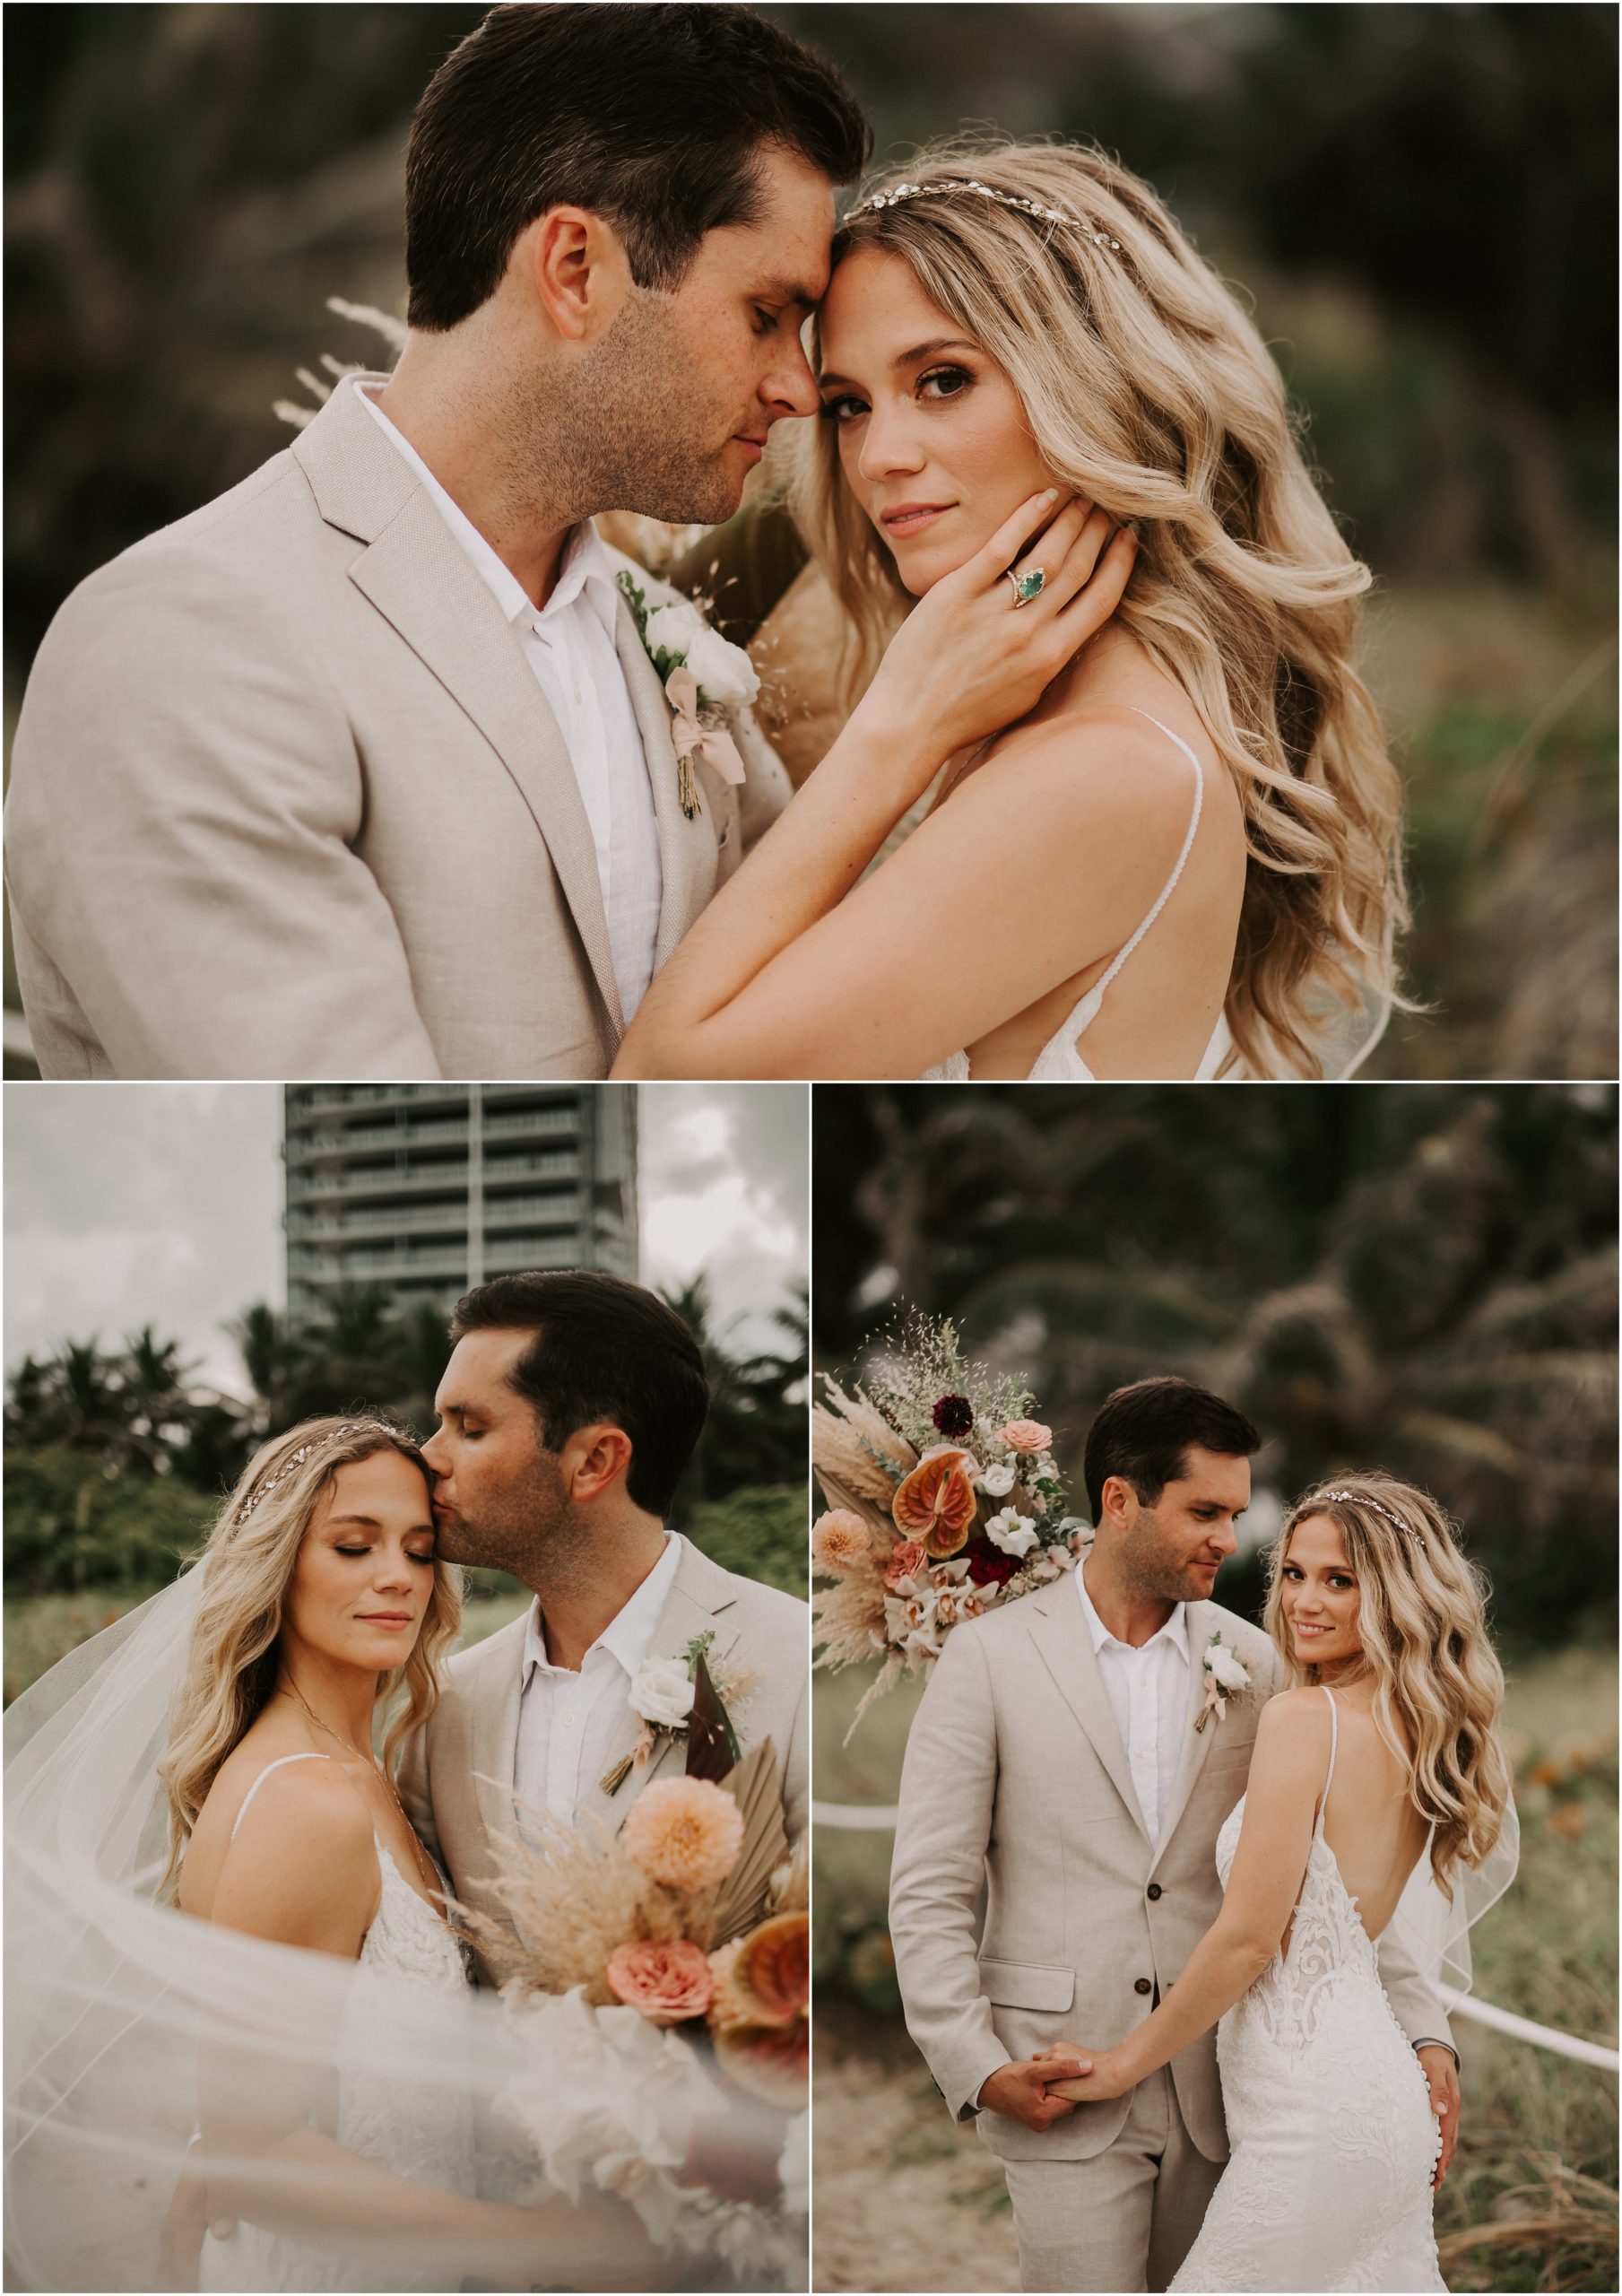 We snuck away to the beach with Jade and Corey after their ceremony and we took advantage of this perfect piece of paradise to create some amazing portraits. We had a great time before heading into the reception!